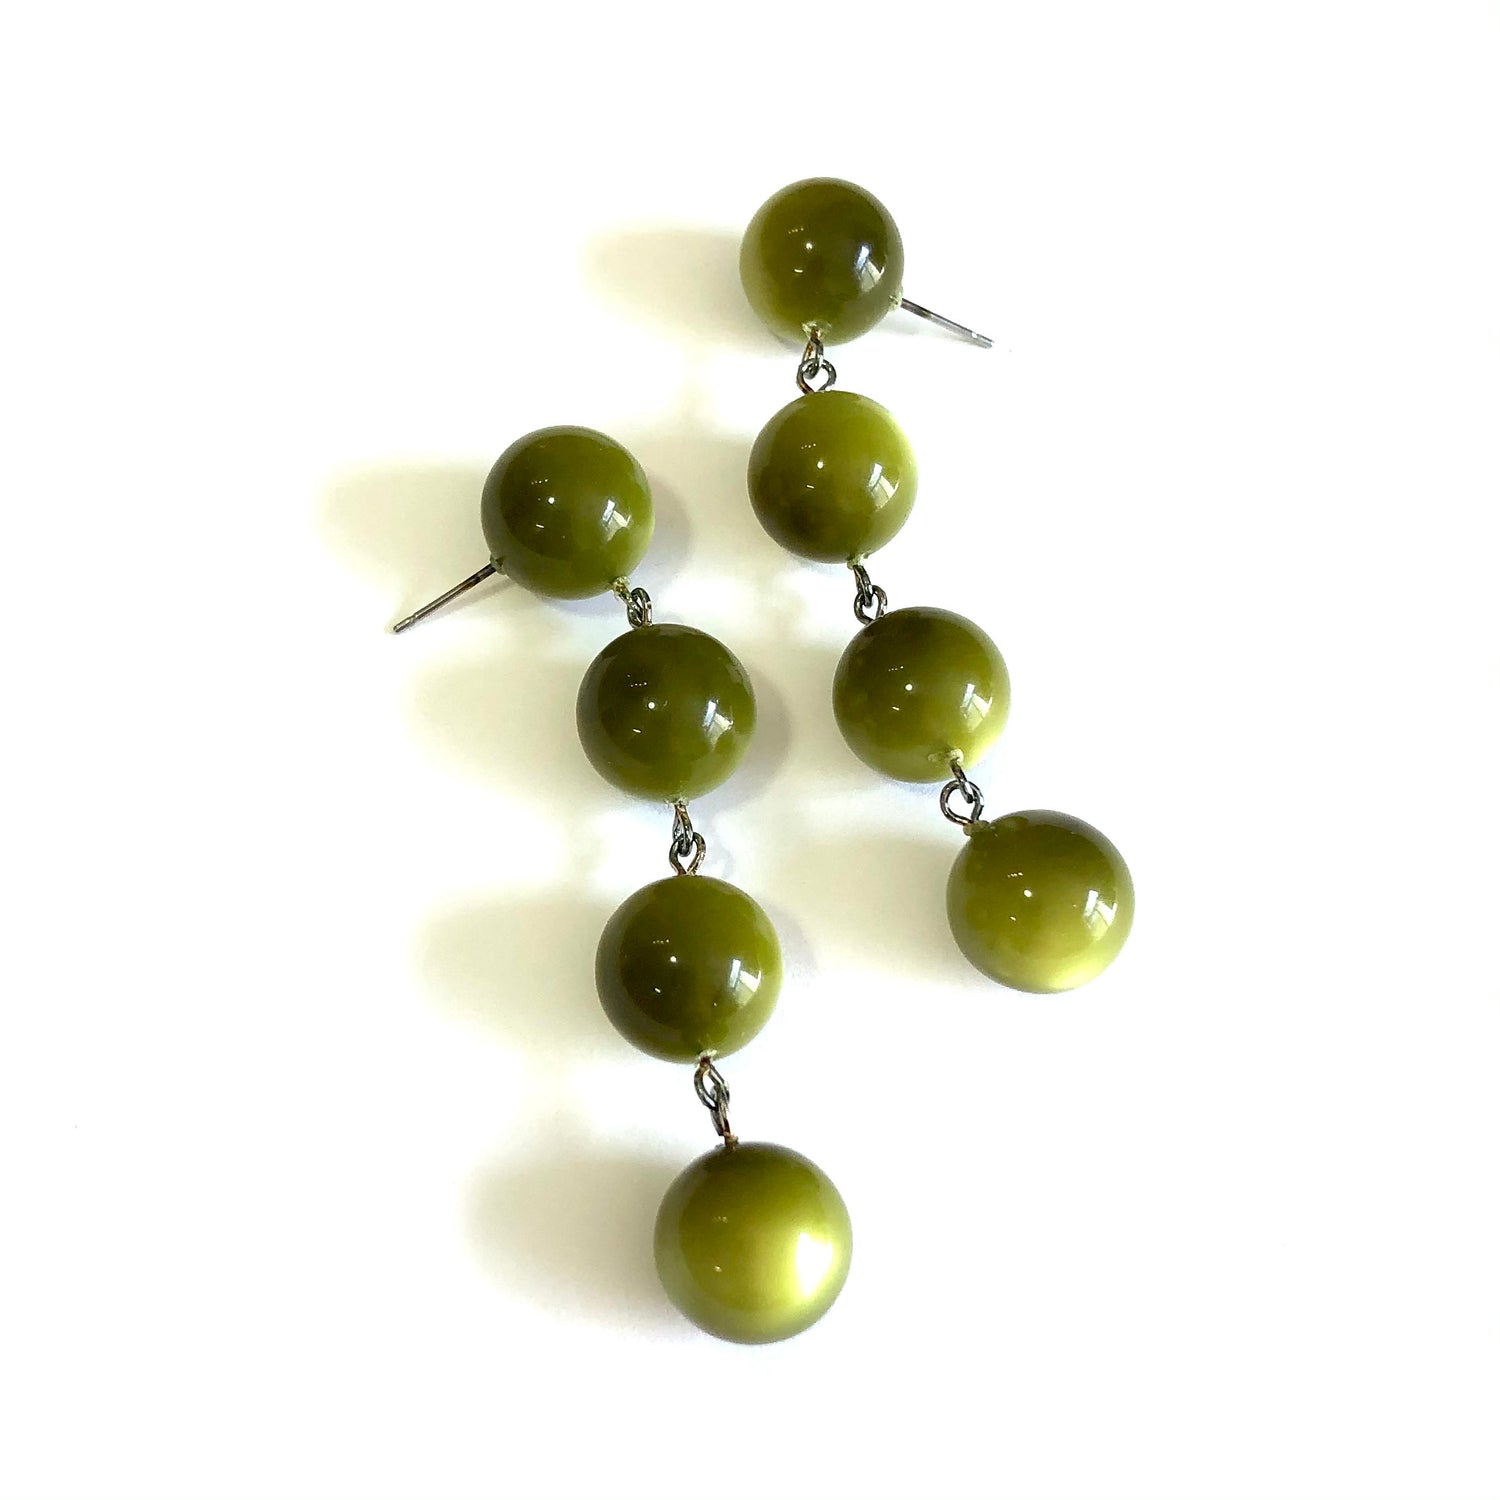 Olive Green Moonglow Four-Bead Statement Earrings